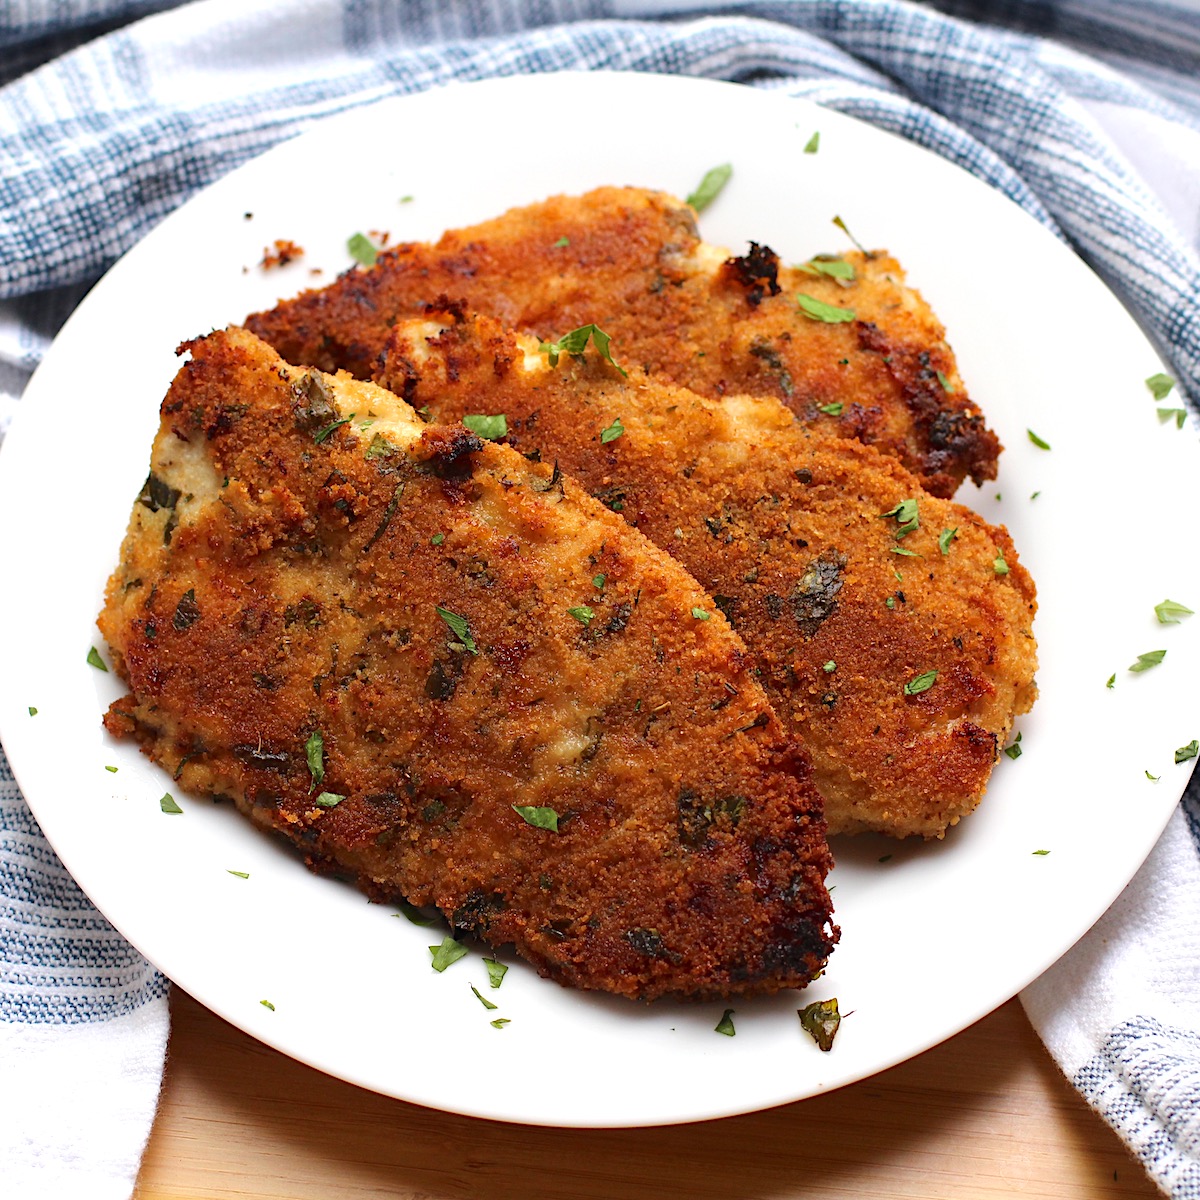 Three golden brown, baked Italian Chicken Cutlets fanned out on a plate with parsley sprinkled on top. Plate is surrounded by a blue and white towel.